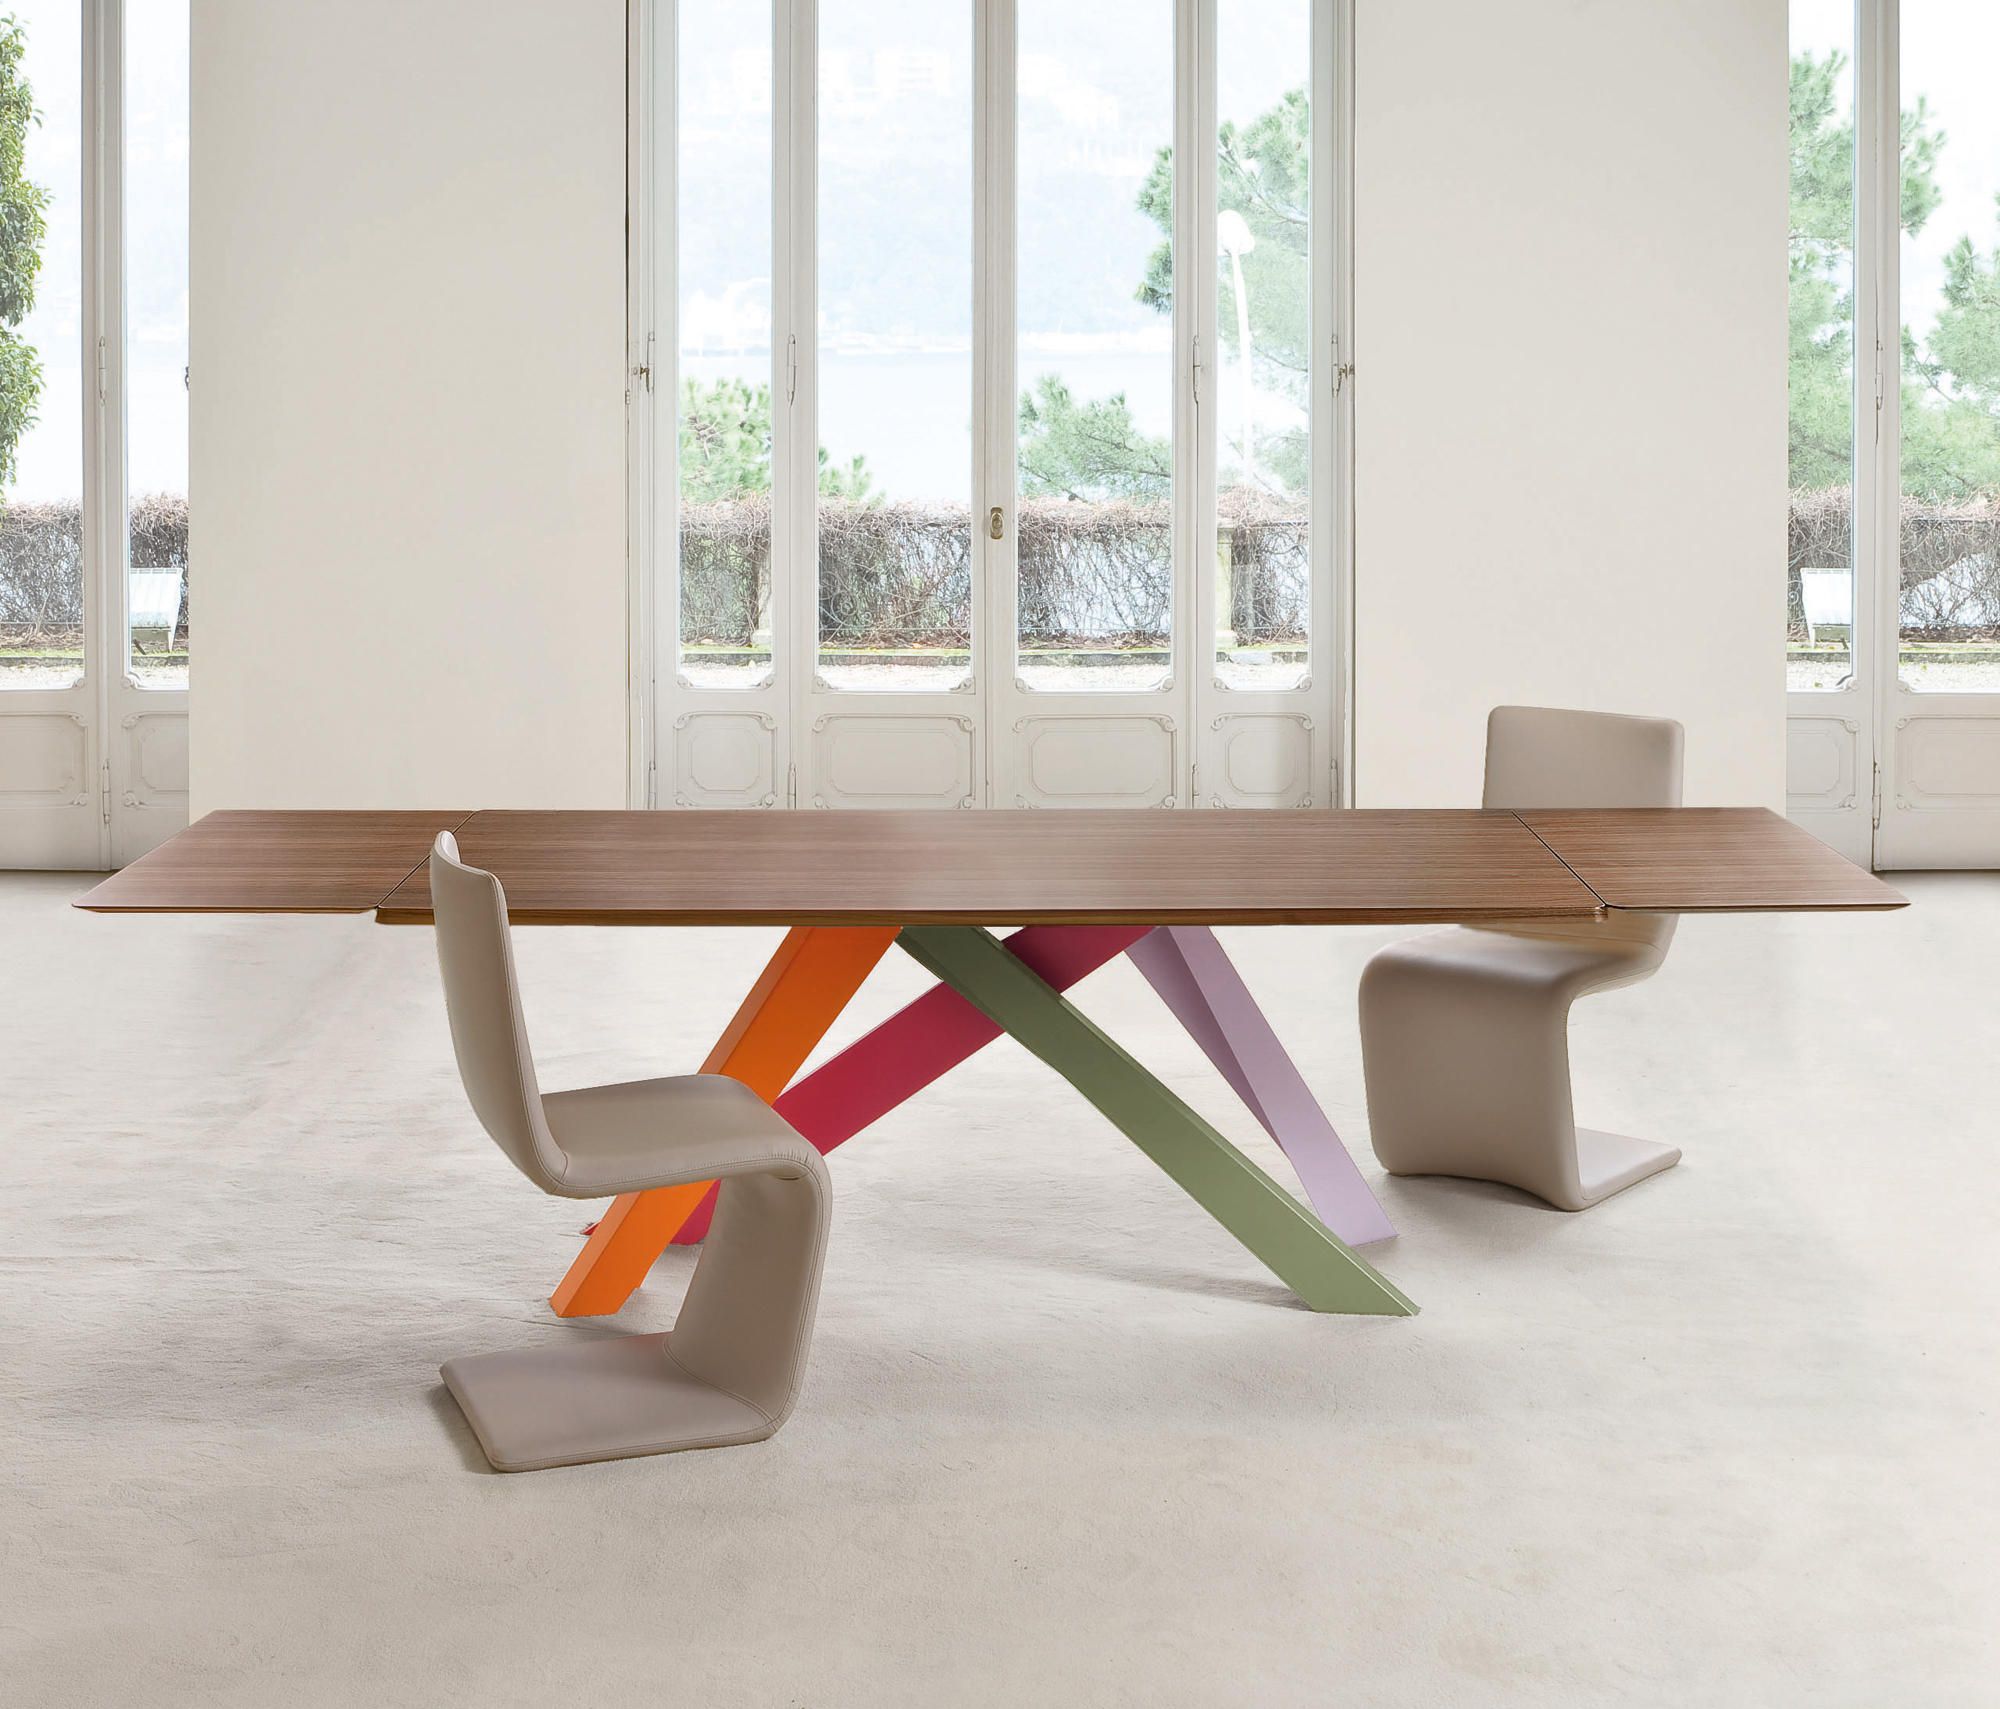 2019 Big Table – Dining Tables From Bonaldo (View 9 of 20)